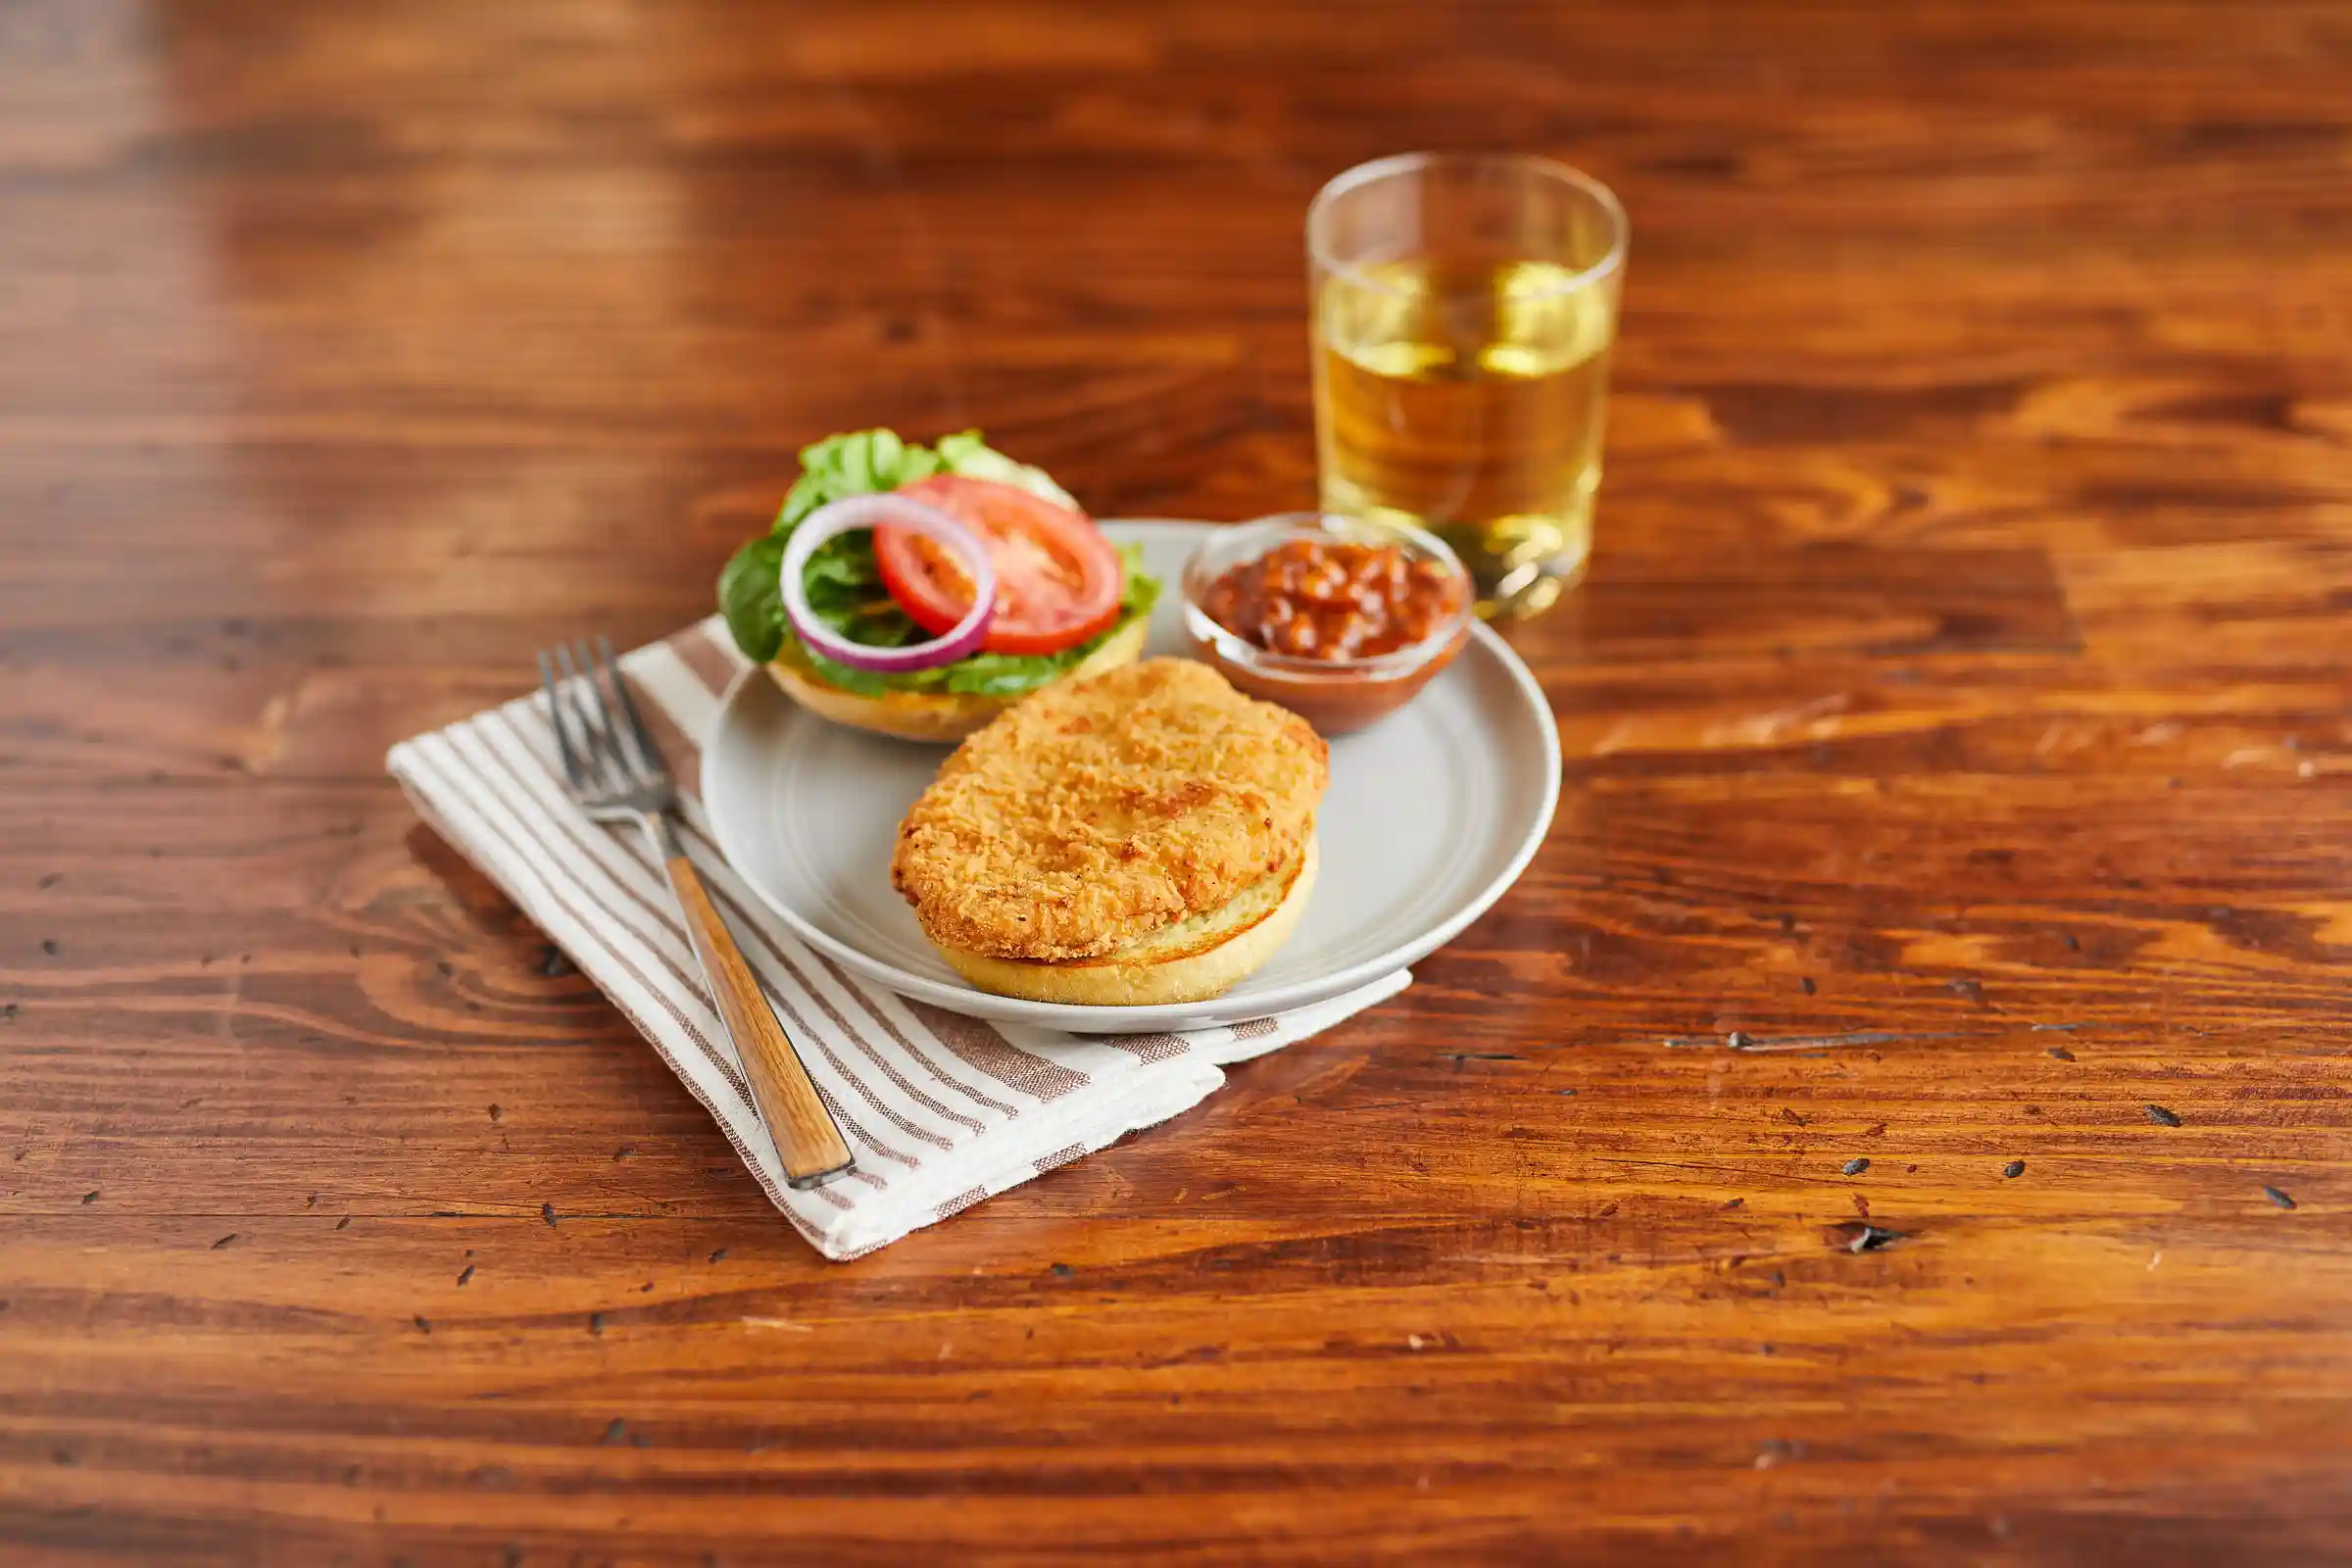 Tyson Red Label® Fully Cooked Homestyle Chicken Breast Filet Fritters, 4 oz.https://images.salsify.com/image/upload/s--PJWWEdMb--/q_25/fvypa5lkmzargnsgwkav.webp